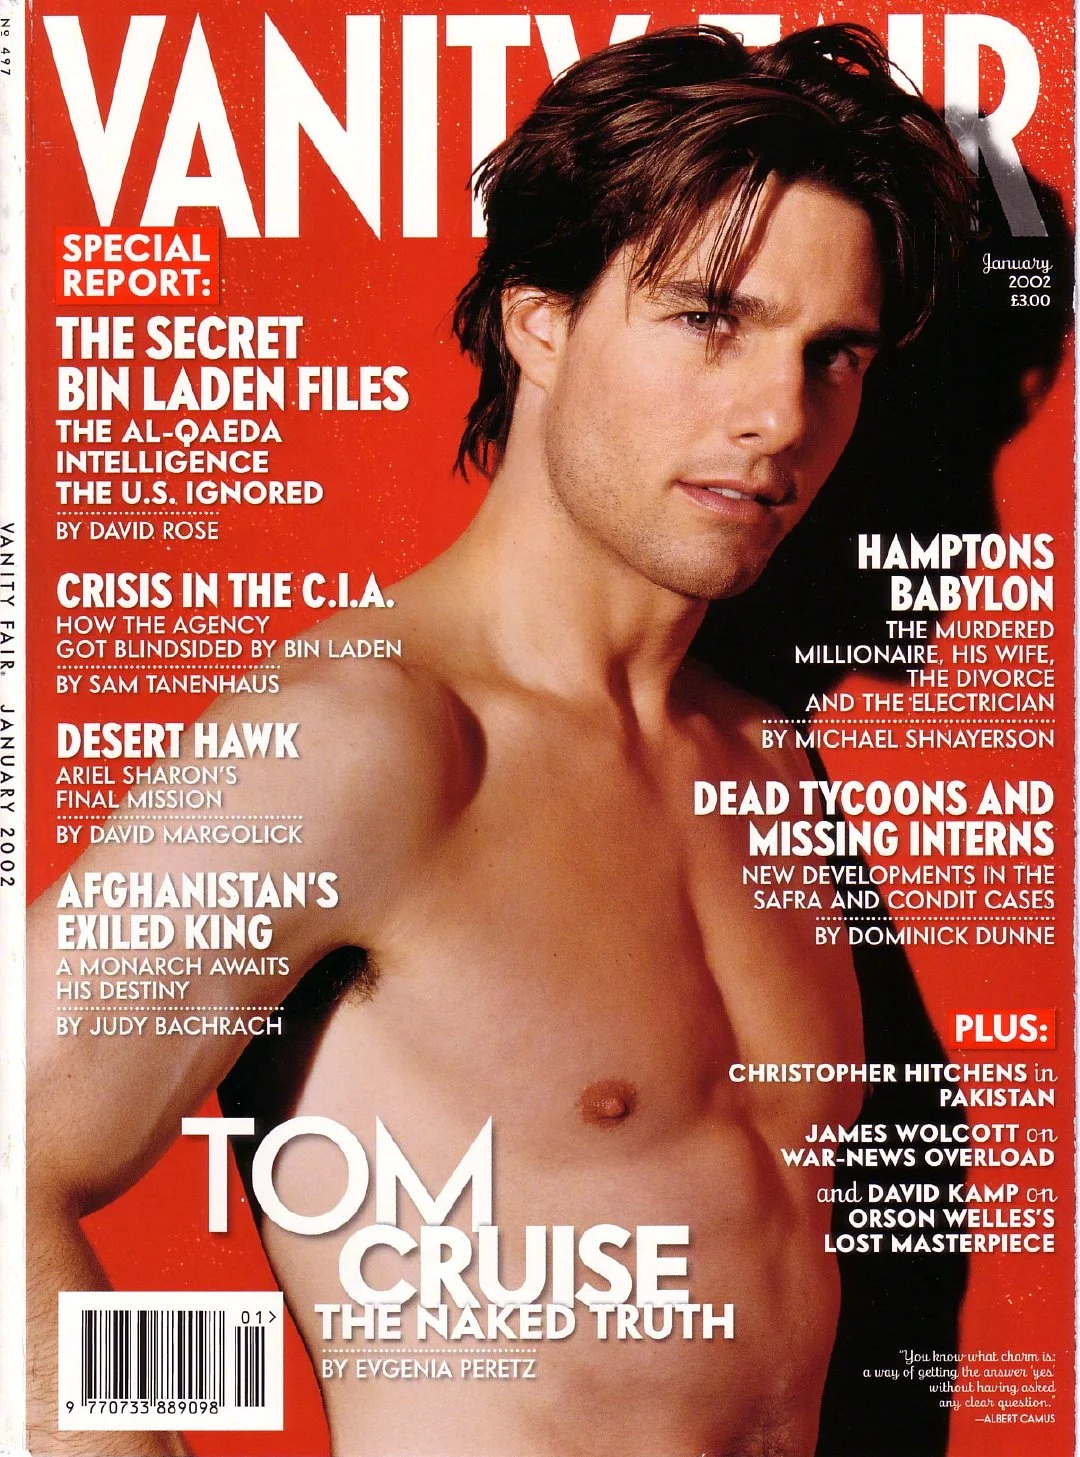 "Vanity Fair" magazine reviews Tom Cruise in the January 2002 issue